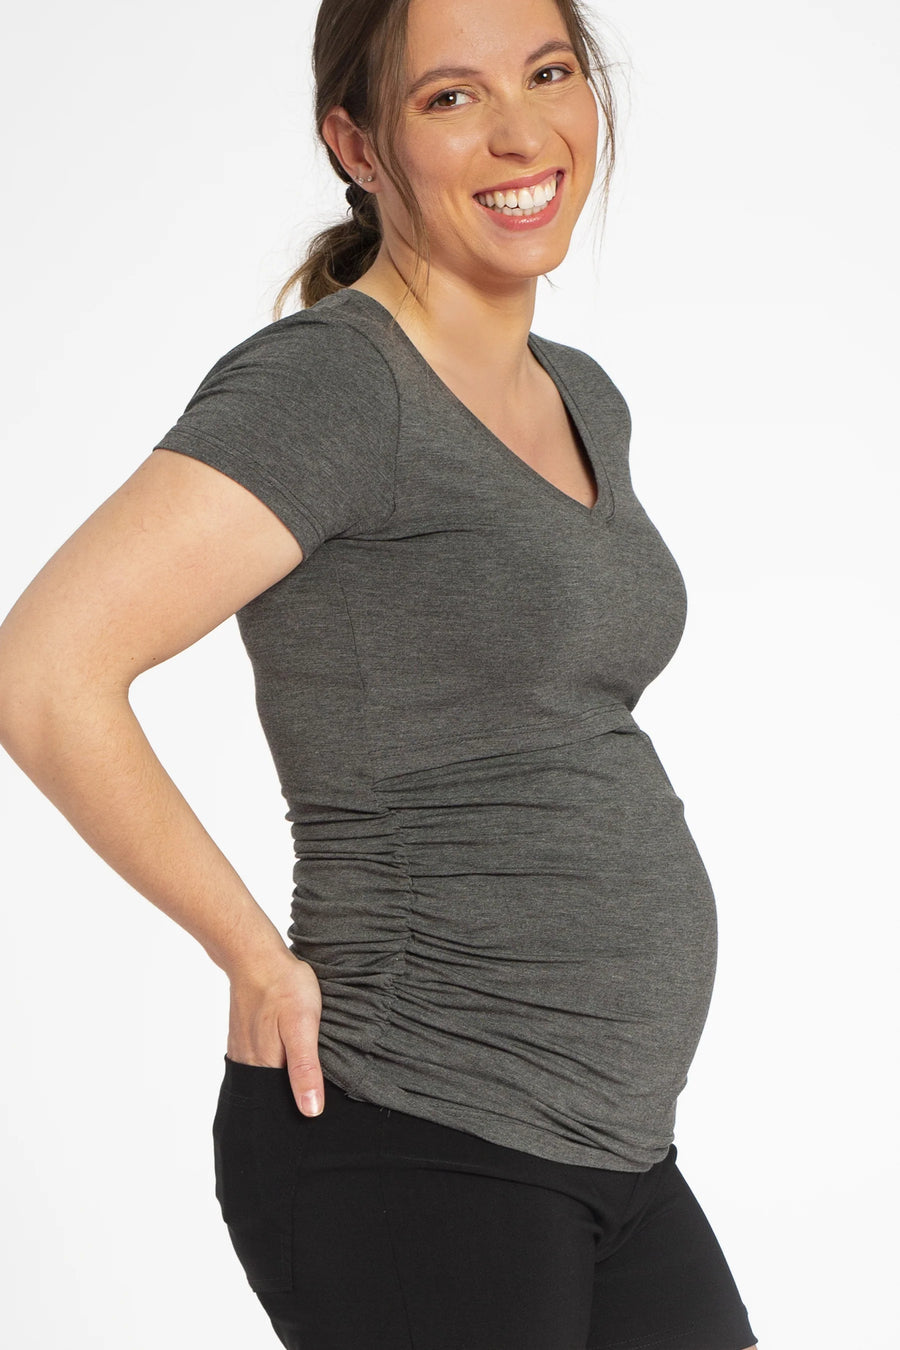 Black organic cotton maternity and nursing camisole, loose fit